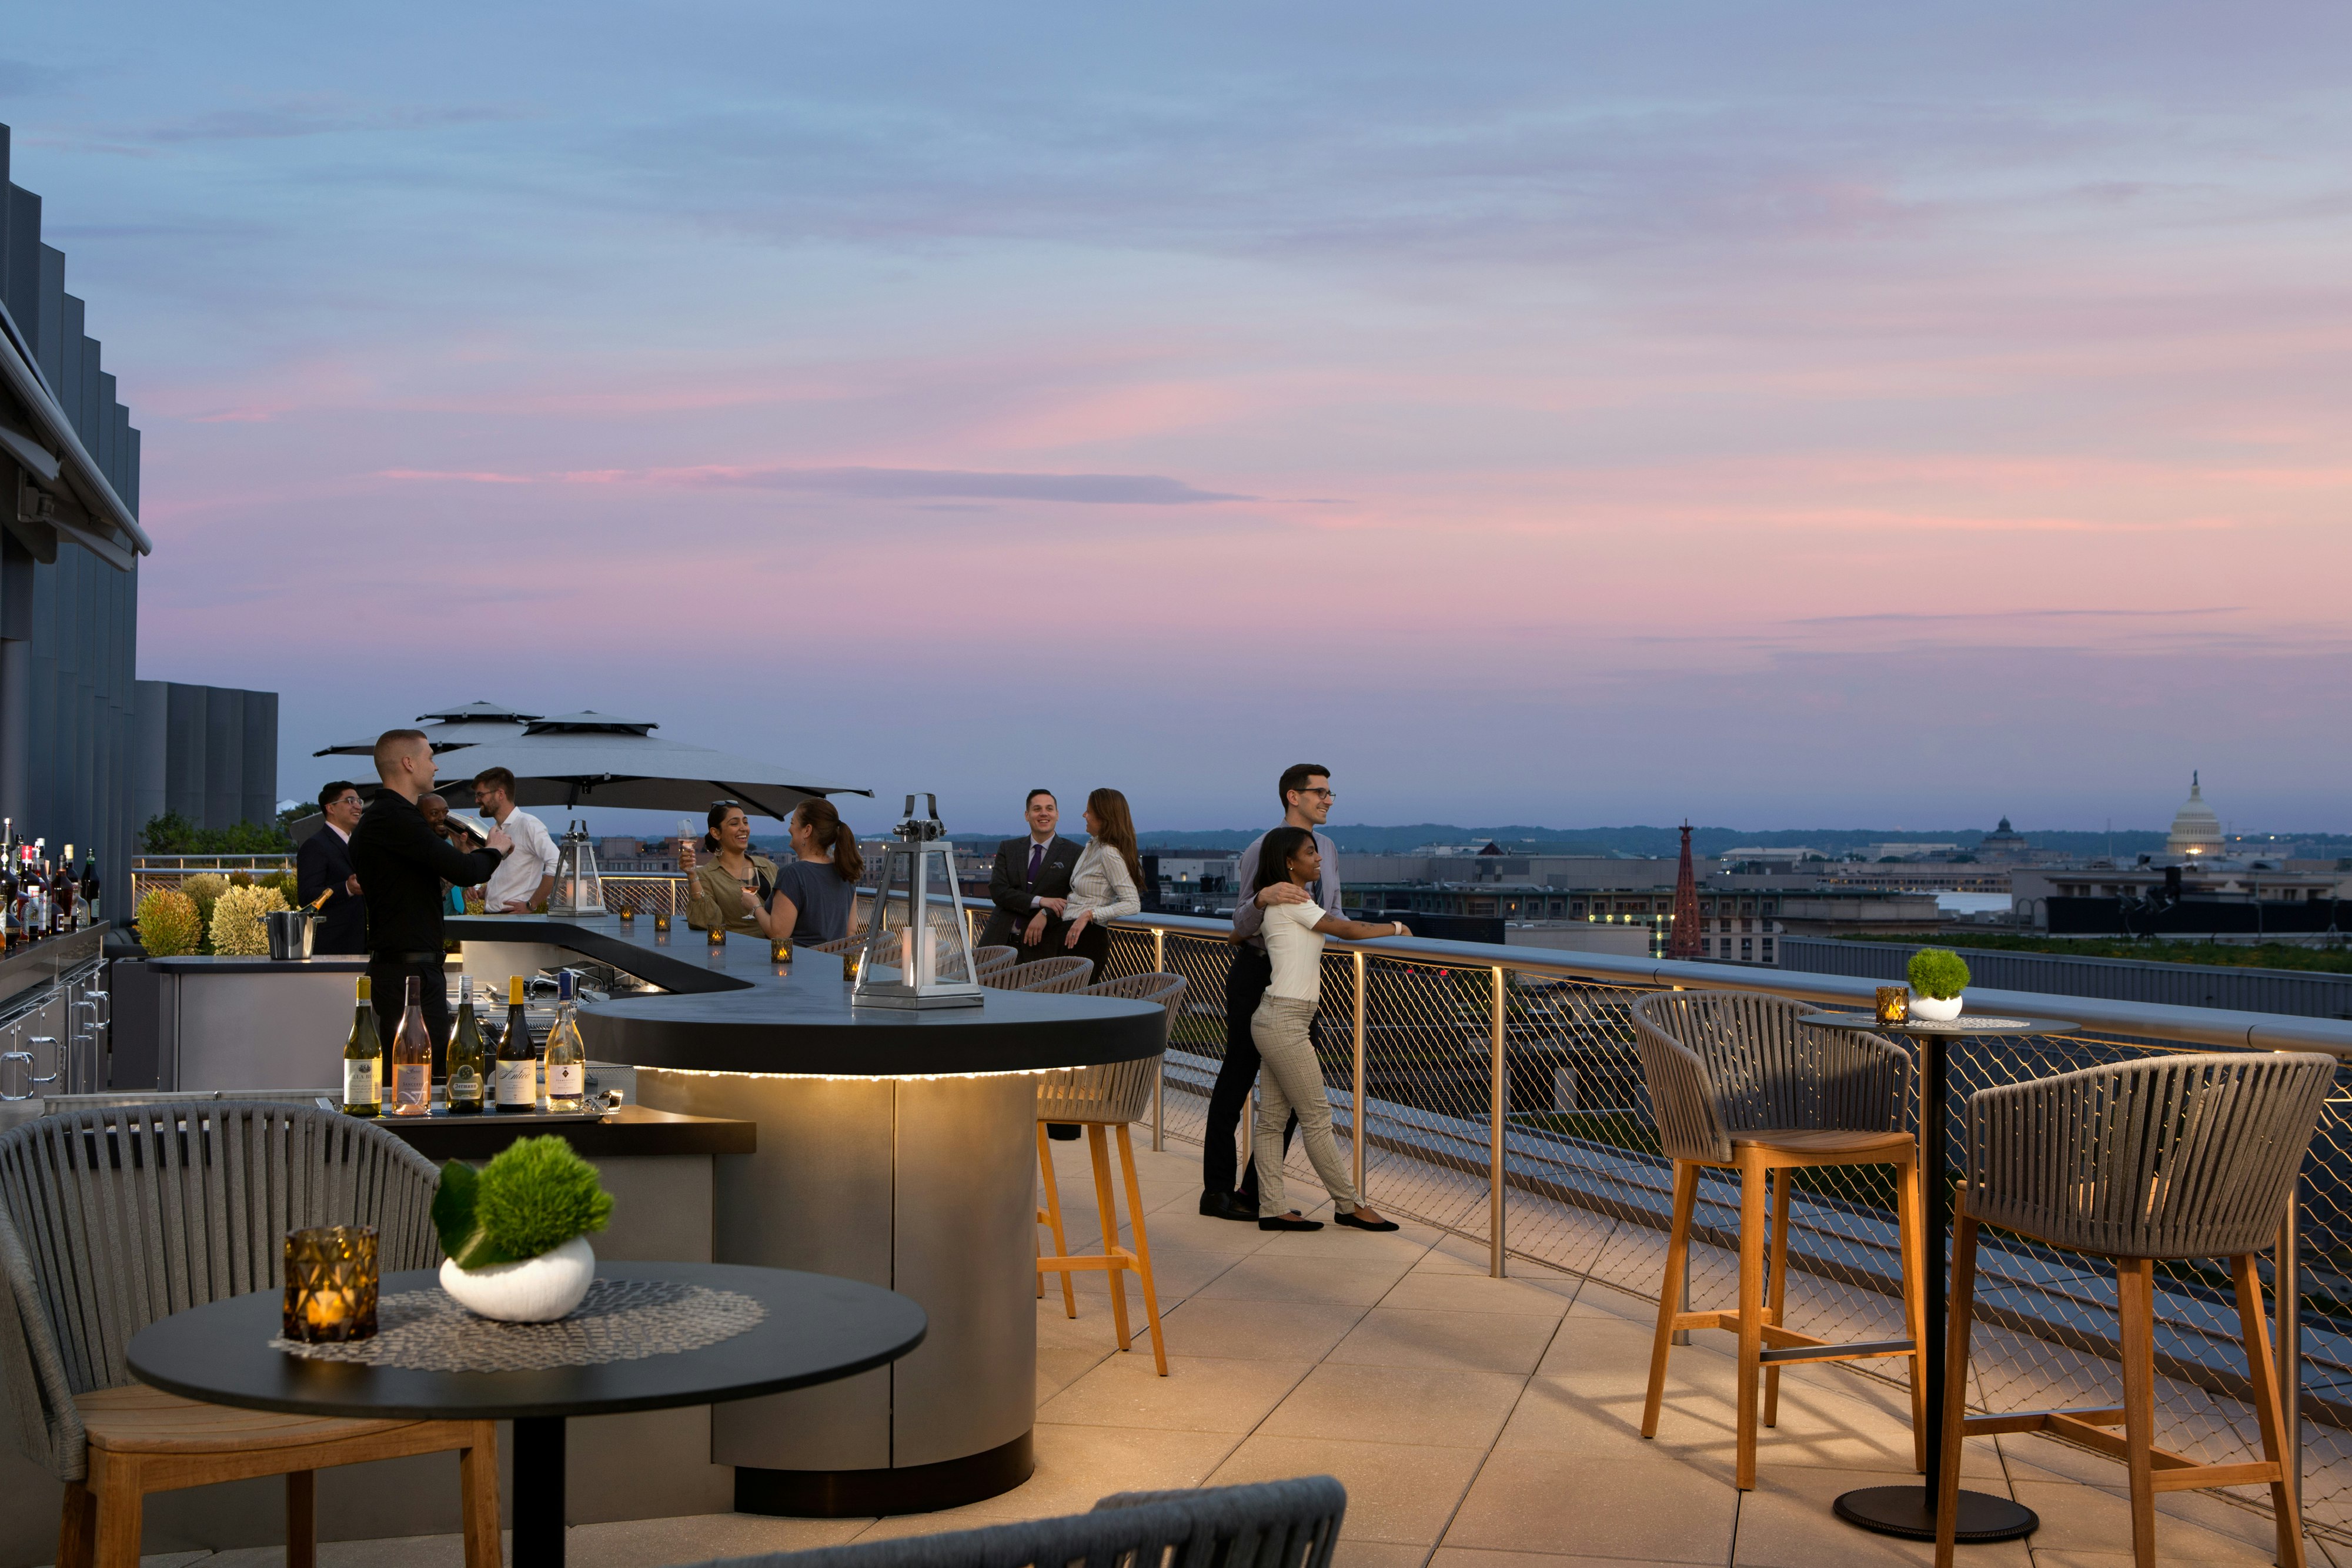 A bartender is shaking a cocktail while a group of people take in the views towards the US Capitol building at Summit rooftop bar.